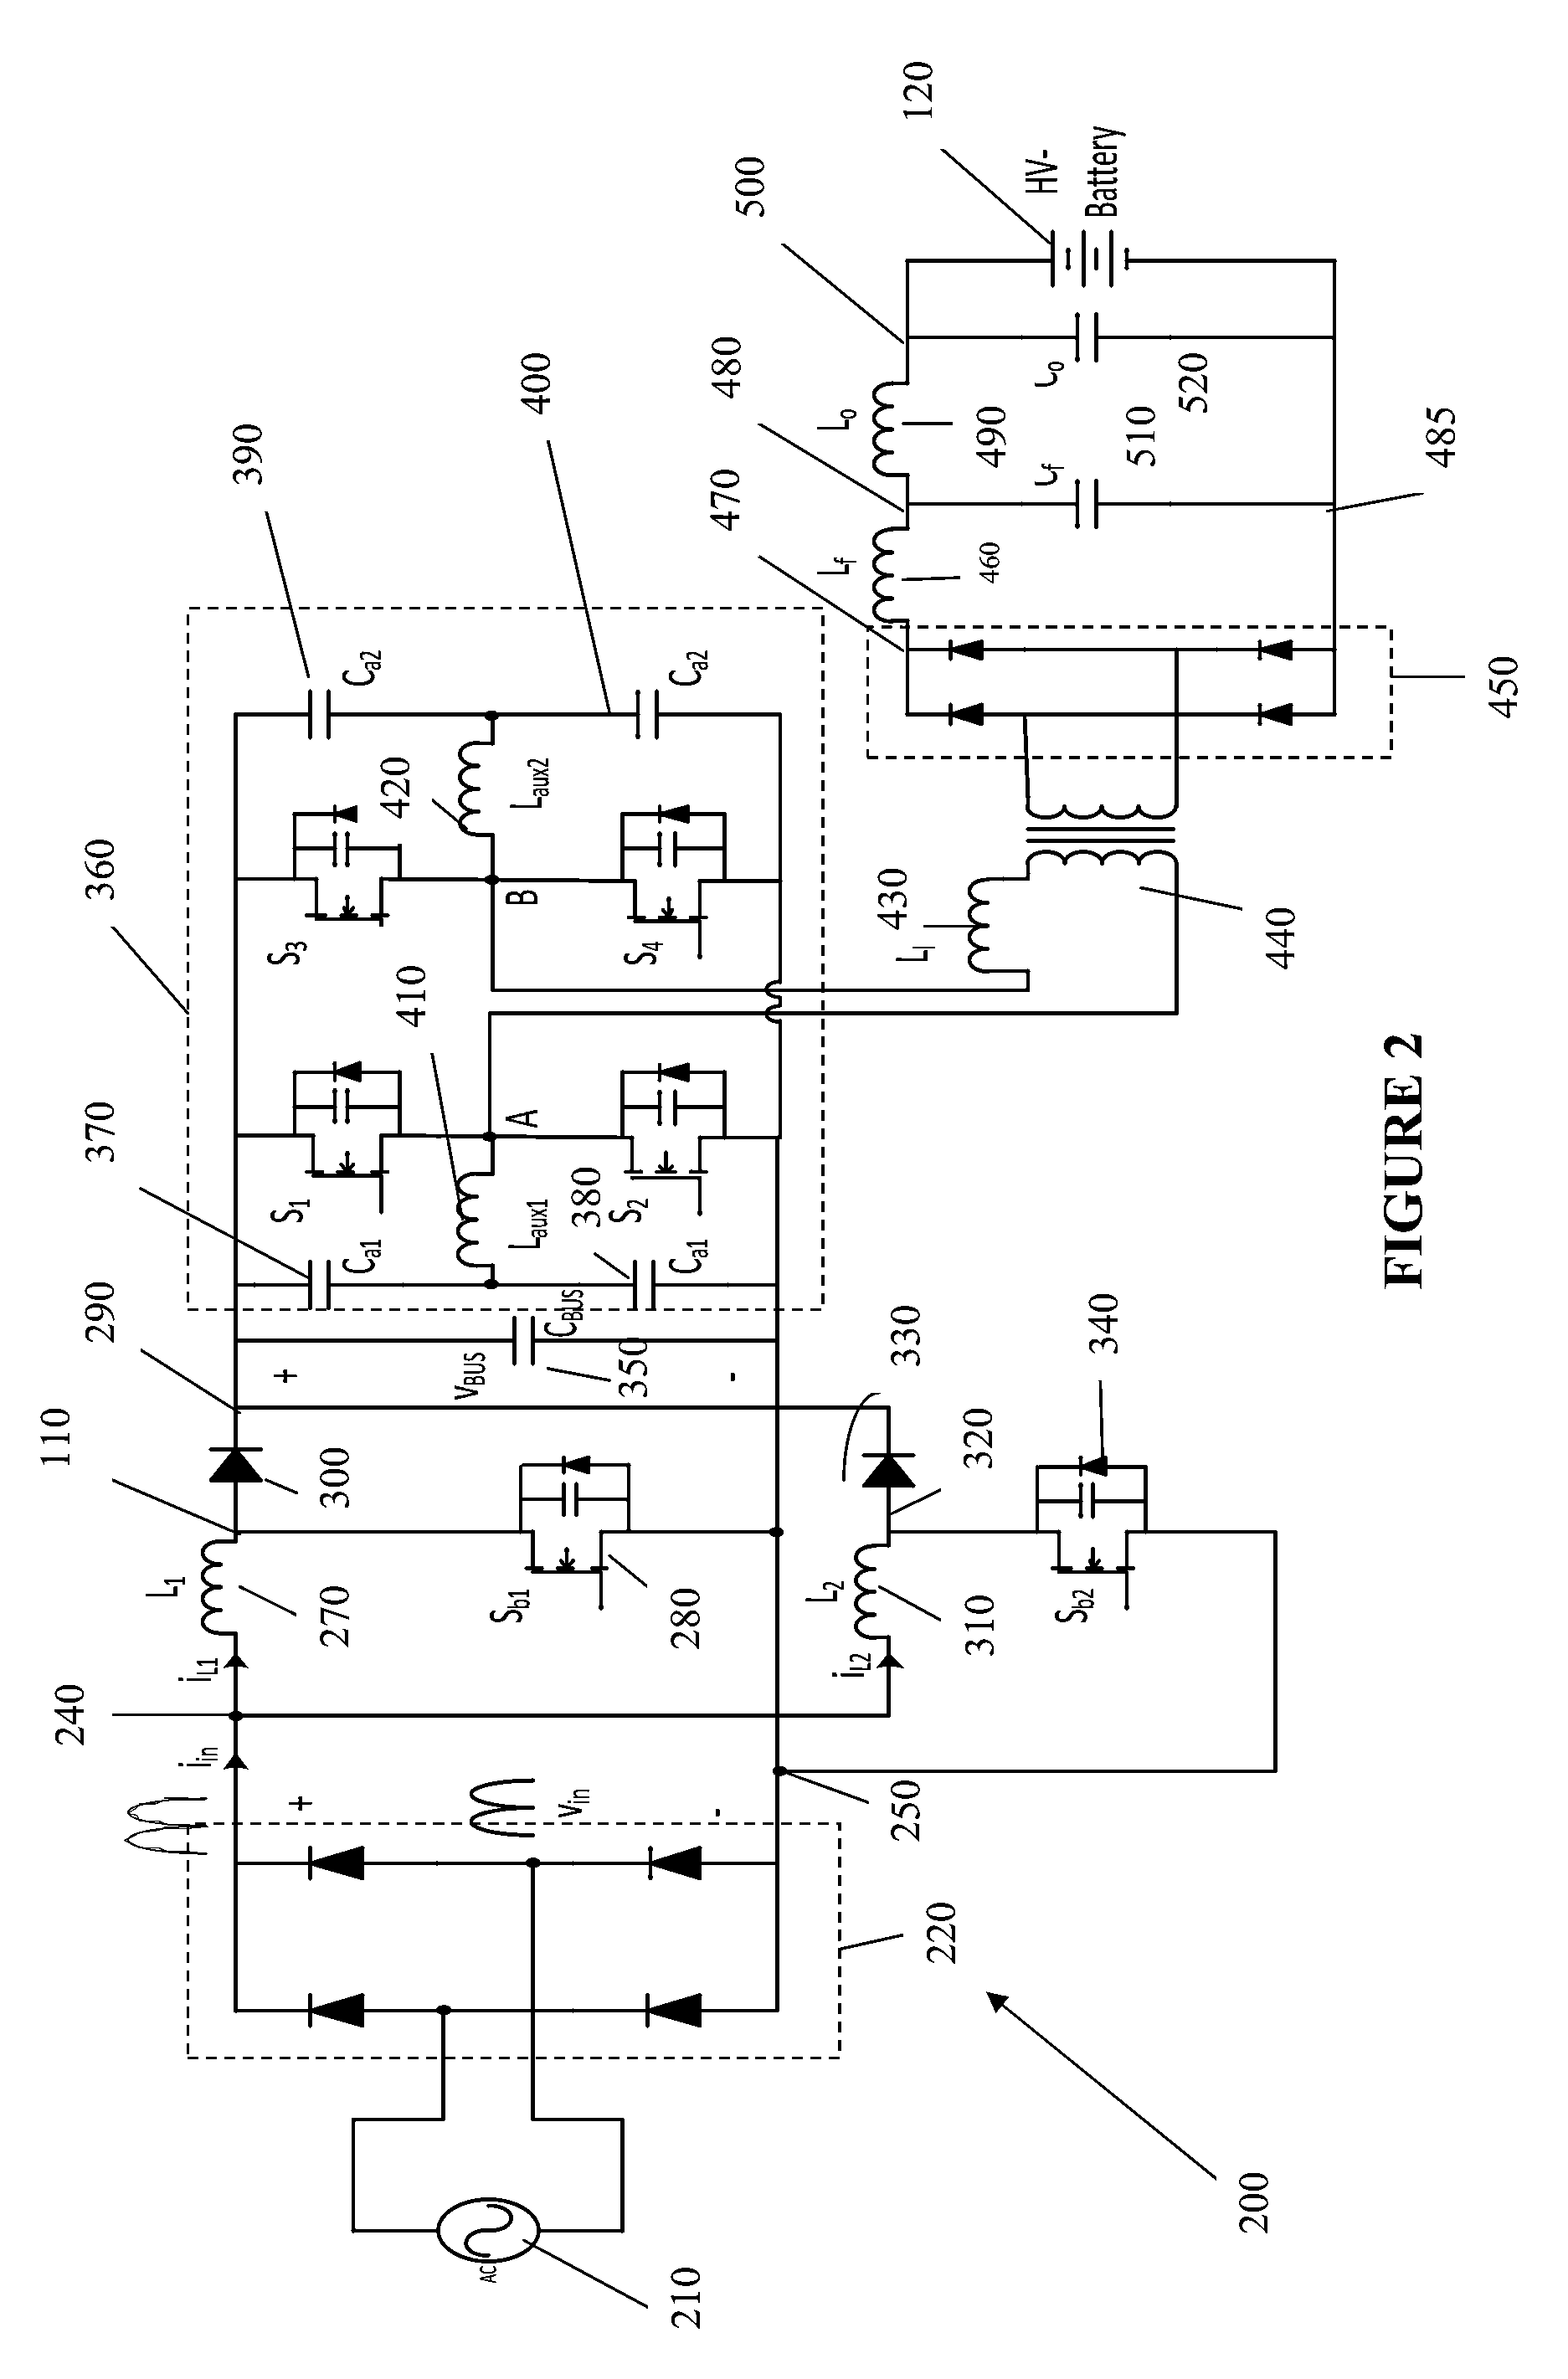 Input power controller for AC/DC battery charging